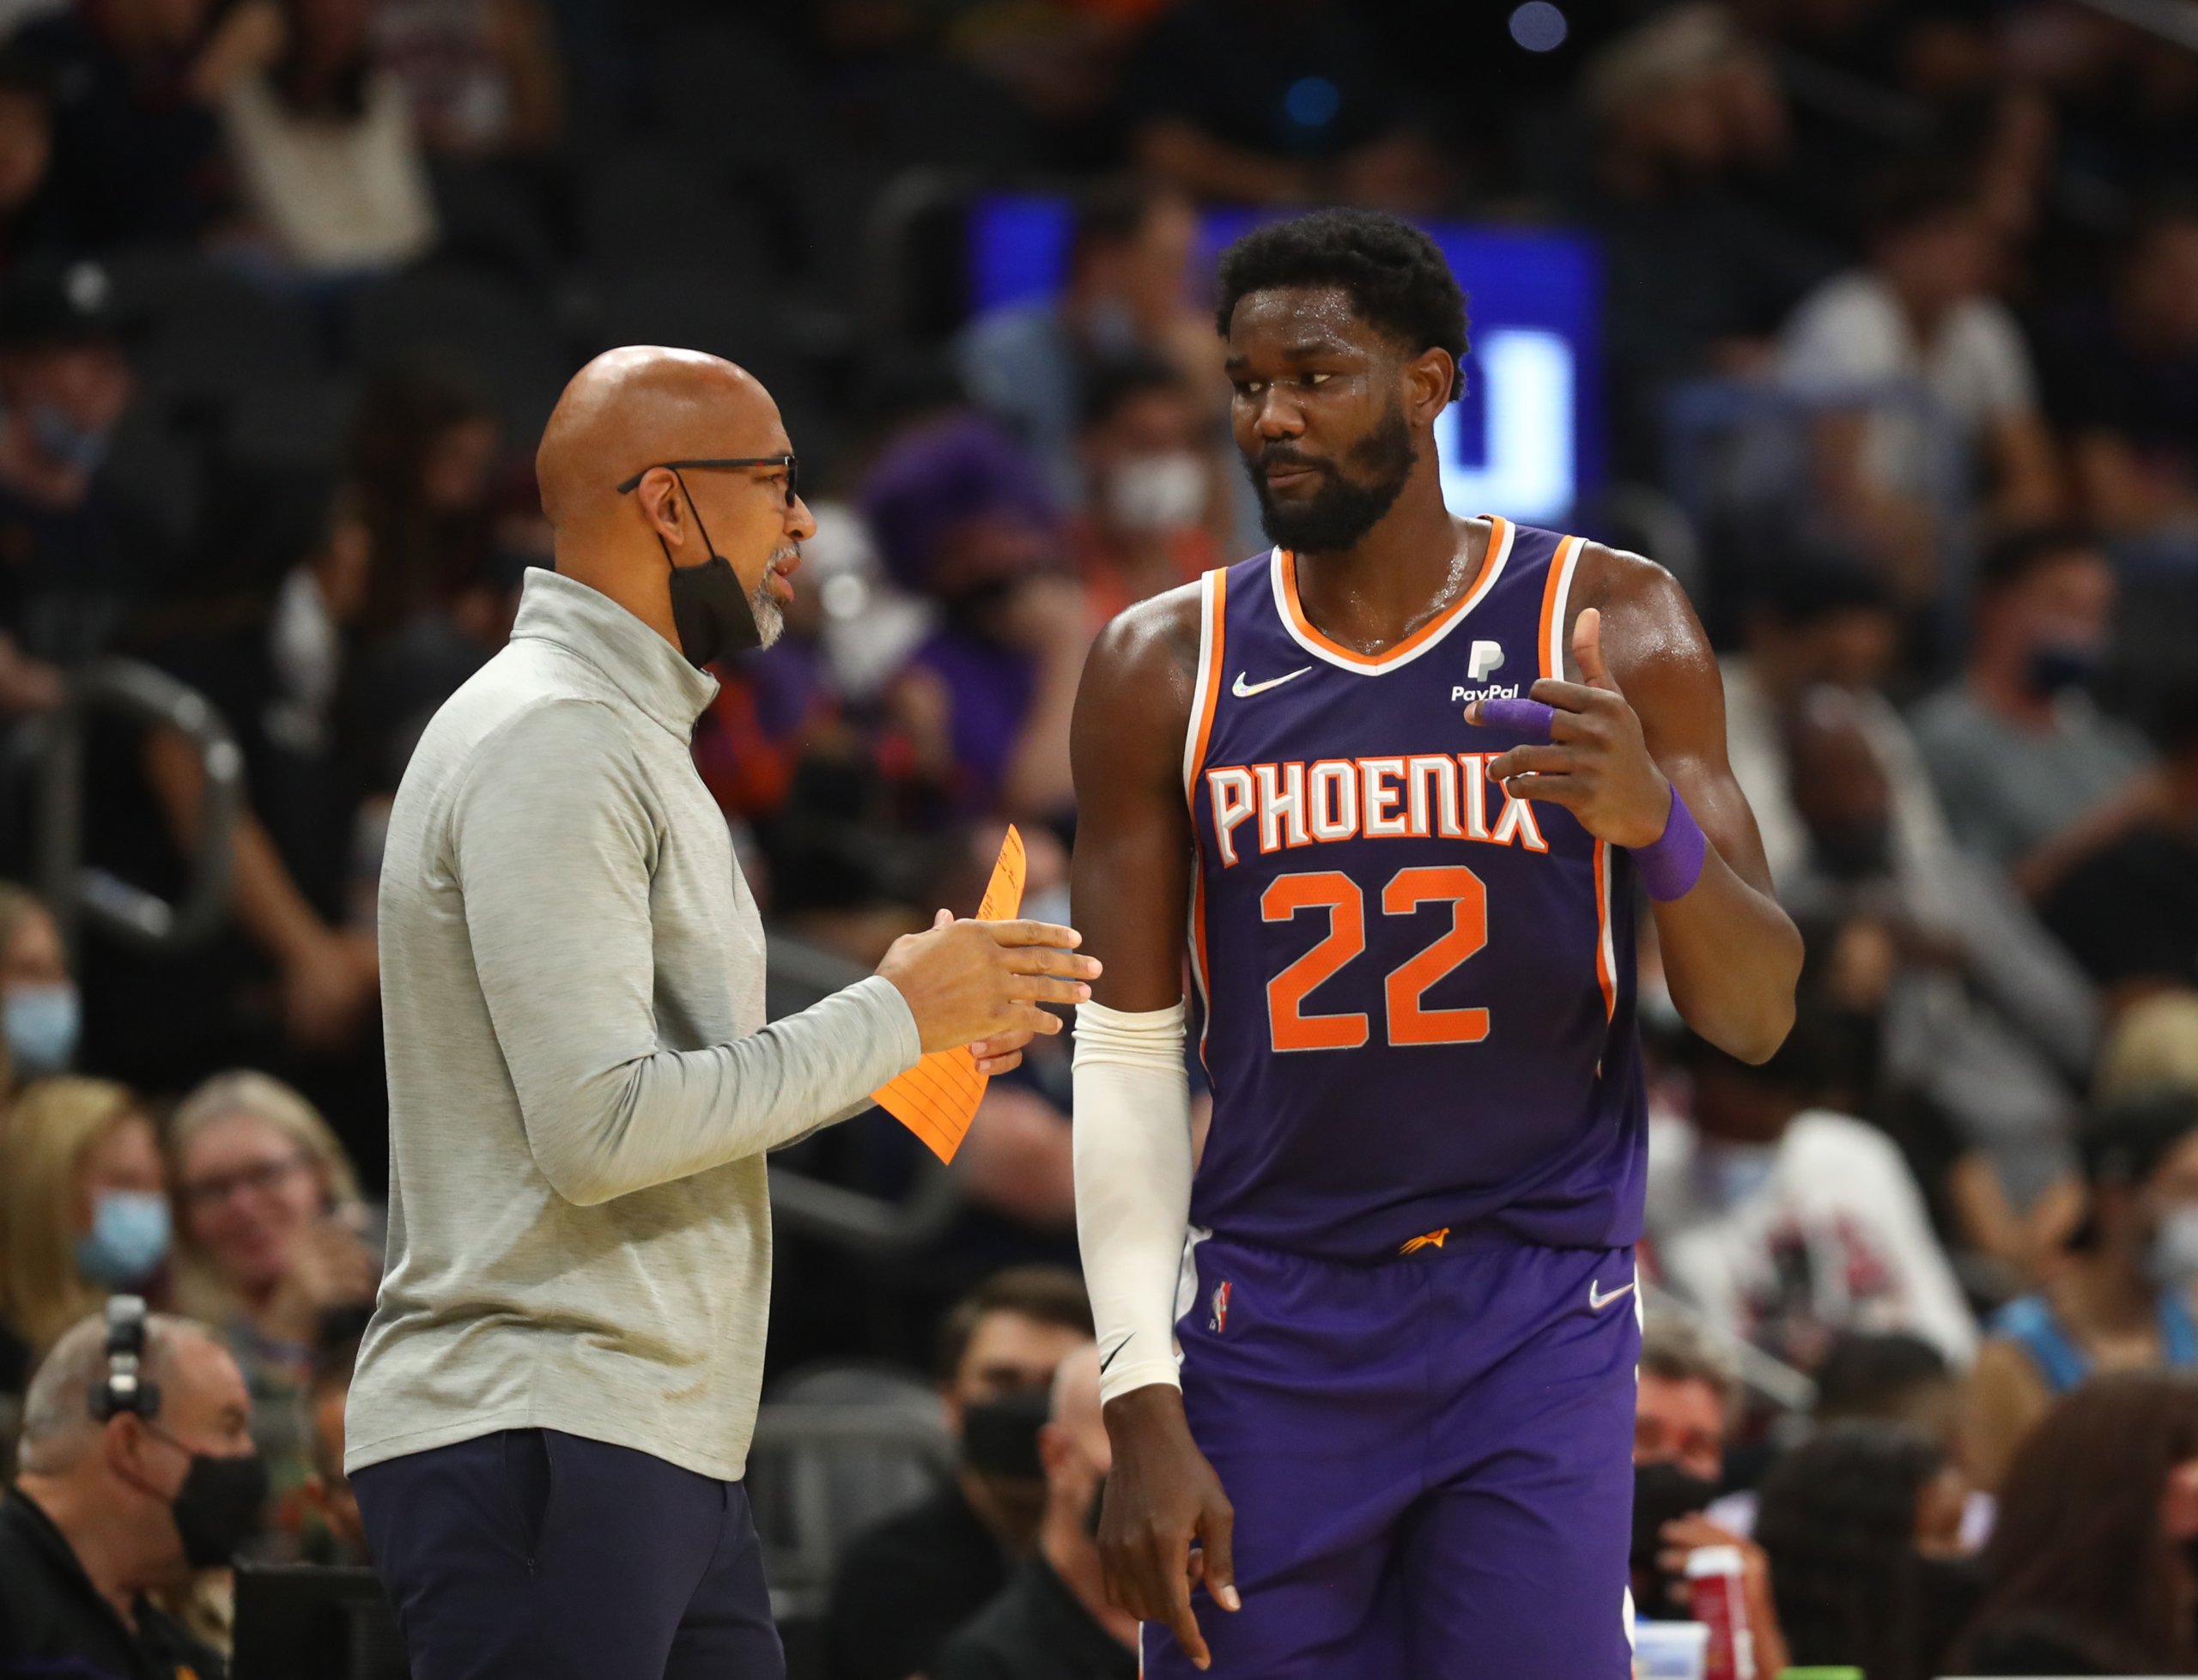 How to feel about the Phoenix Suns embarrassing and disappointing loss by  33 at home to the Mavericks - Quora